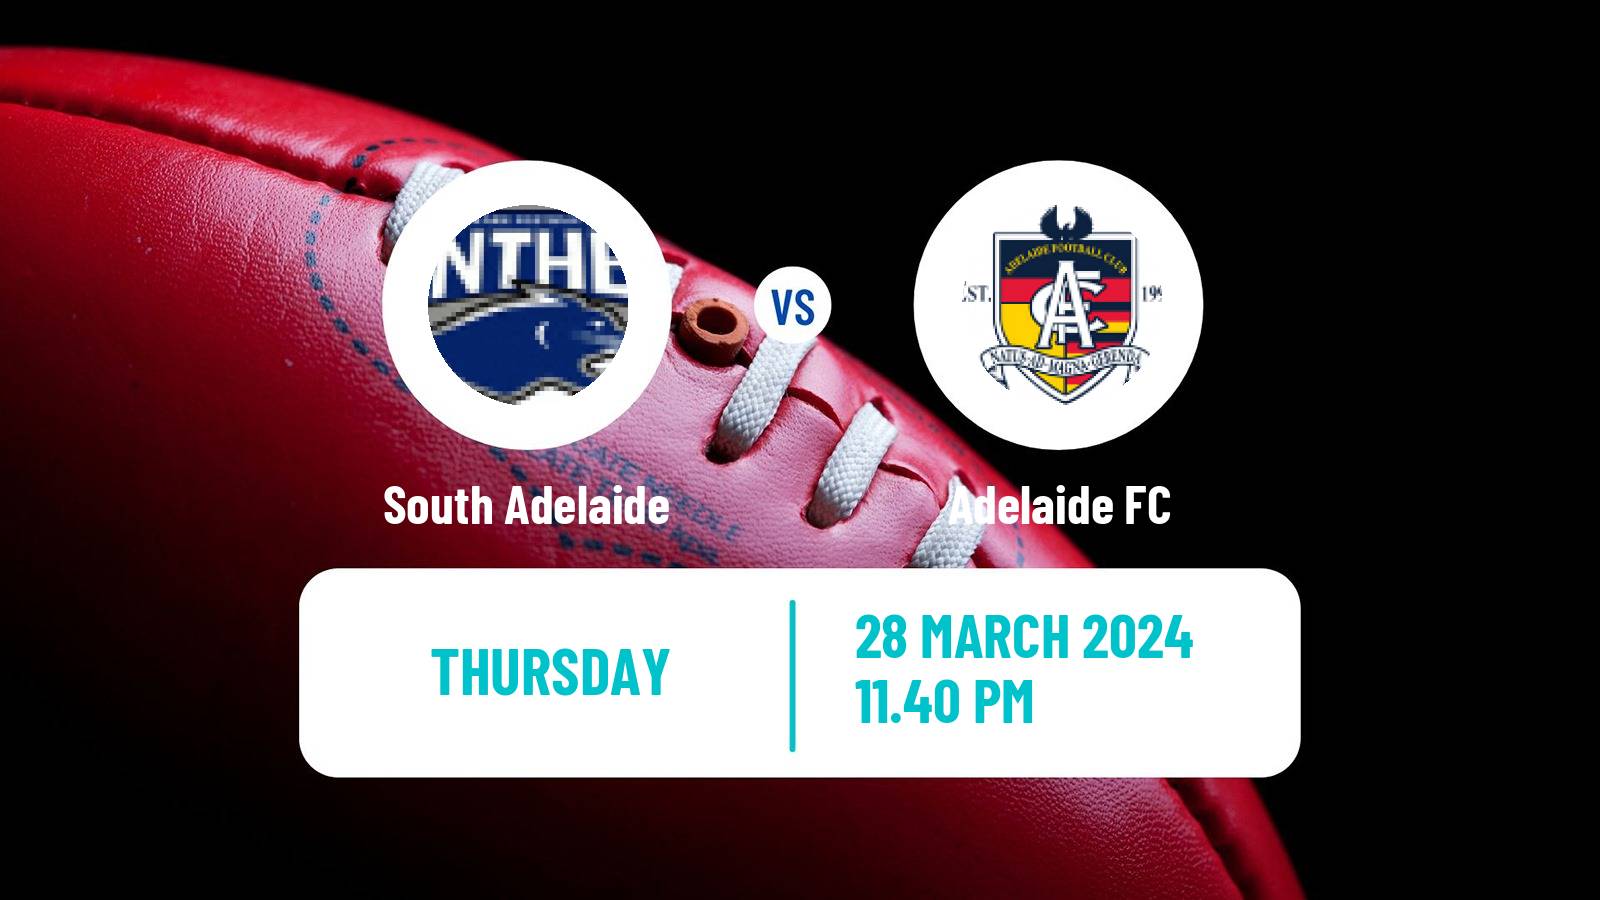 Aussie rules SANFL South Adelaide - Adelaide